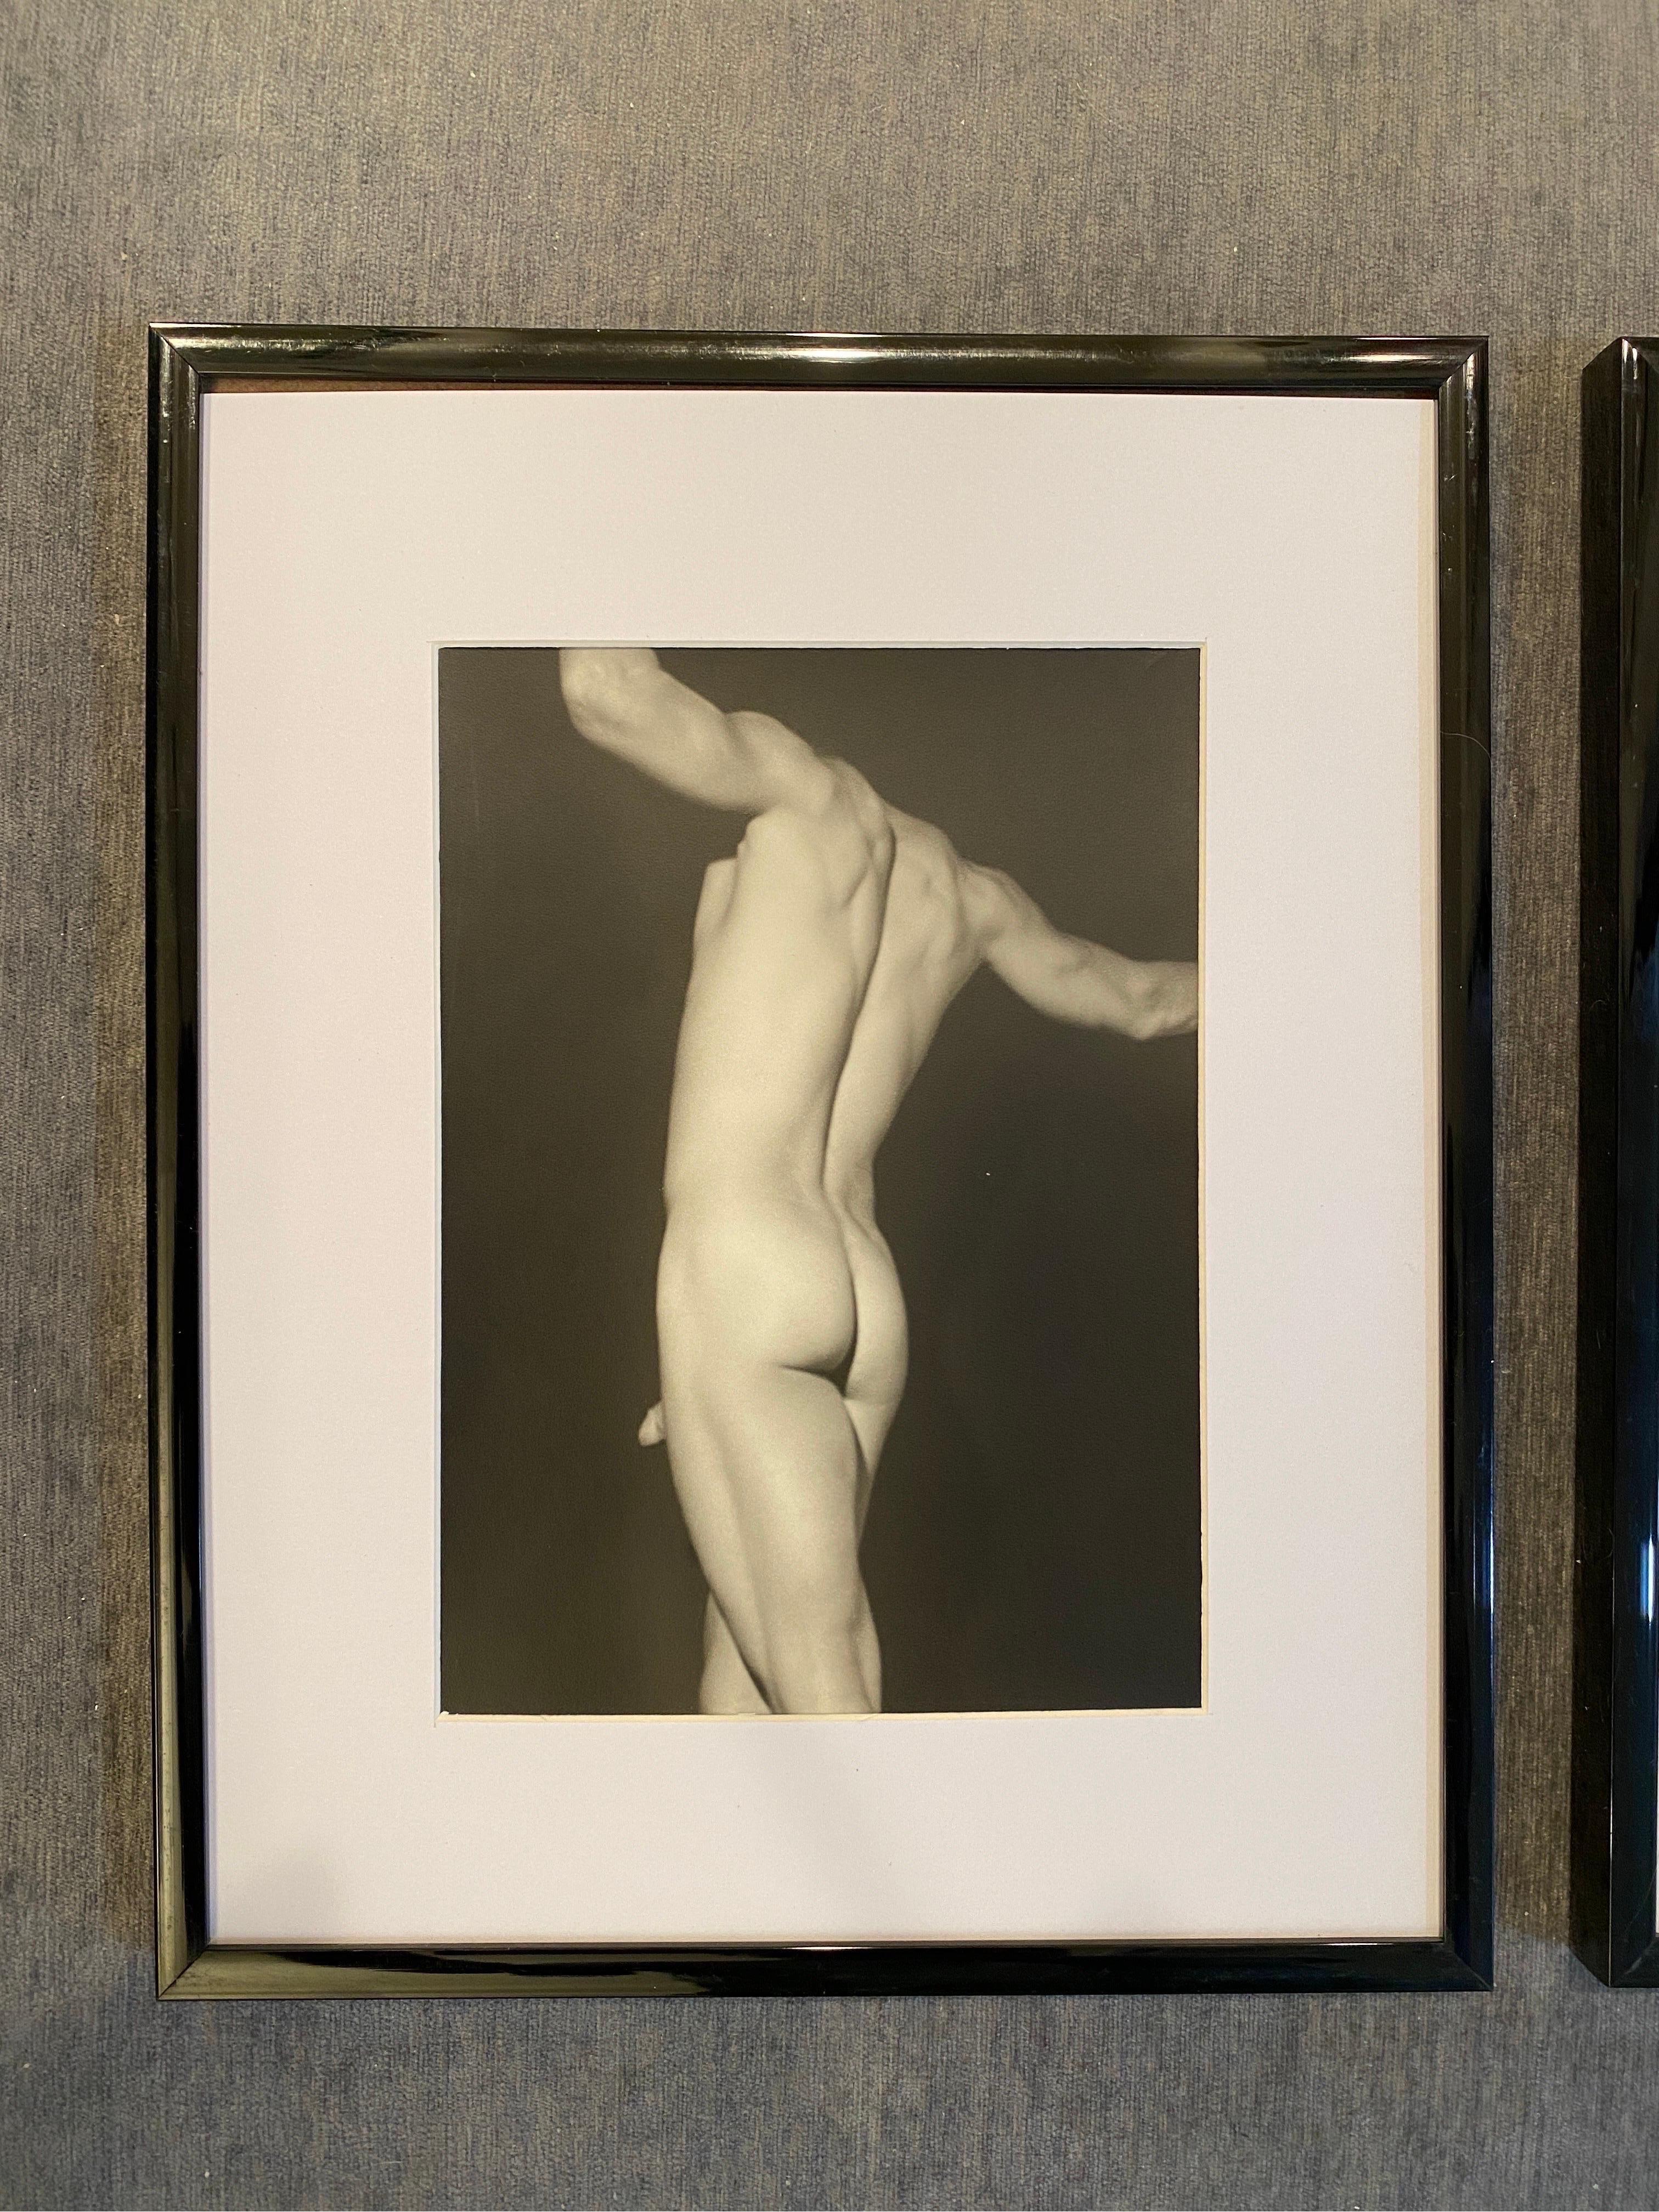 Pair of Original B&W Male Nude Silver Gelatin Photographs 1996 by George Machado In Good Condition For Sale In Palm Springs, CA